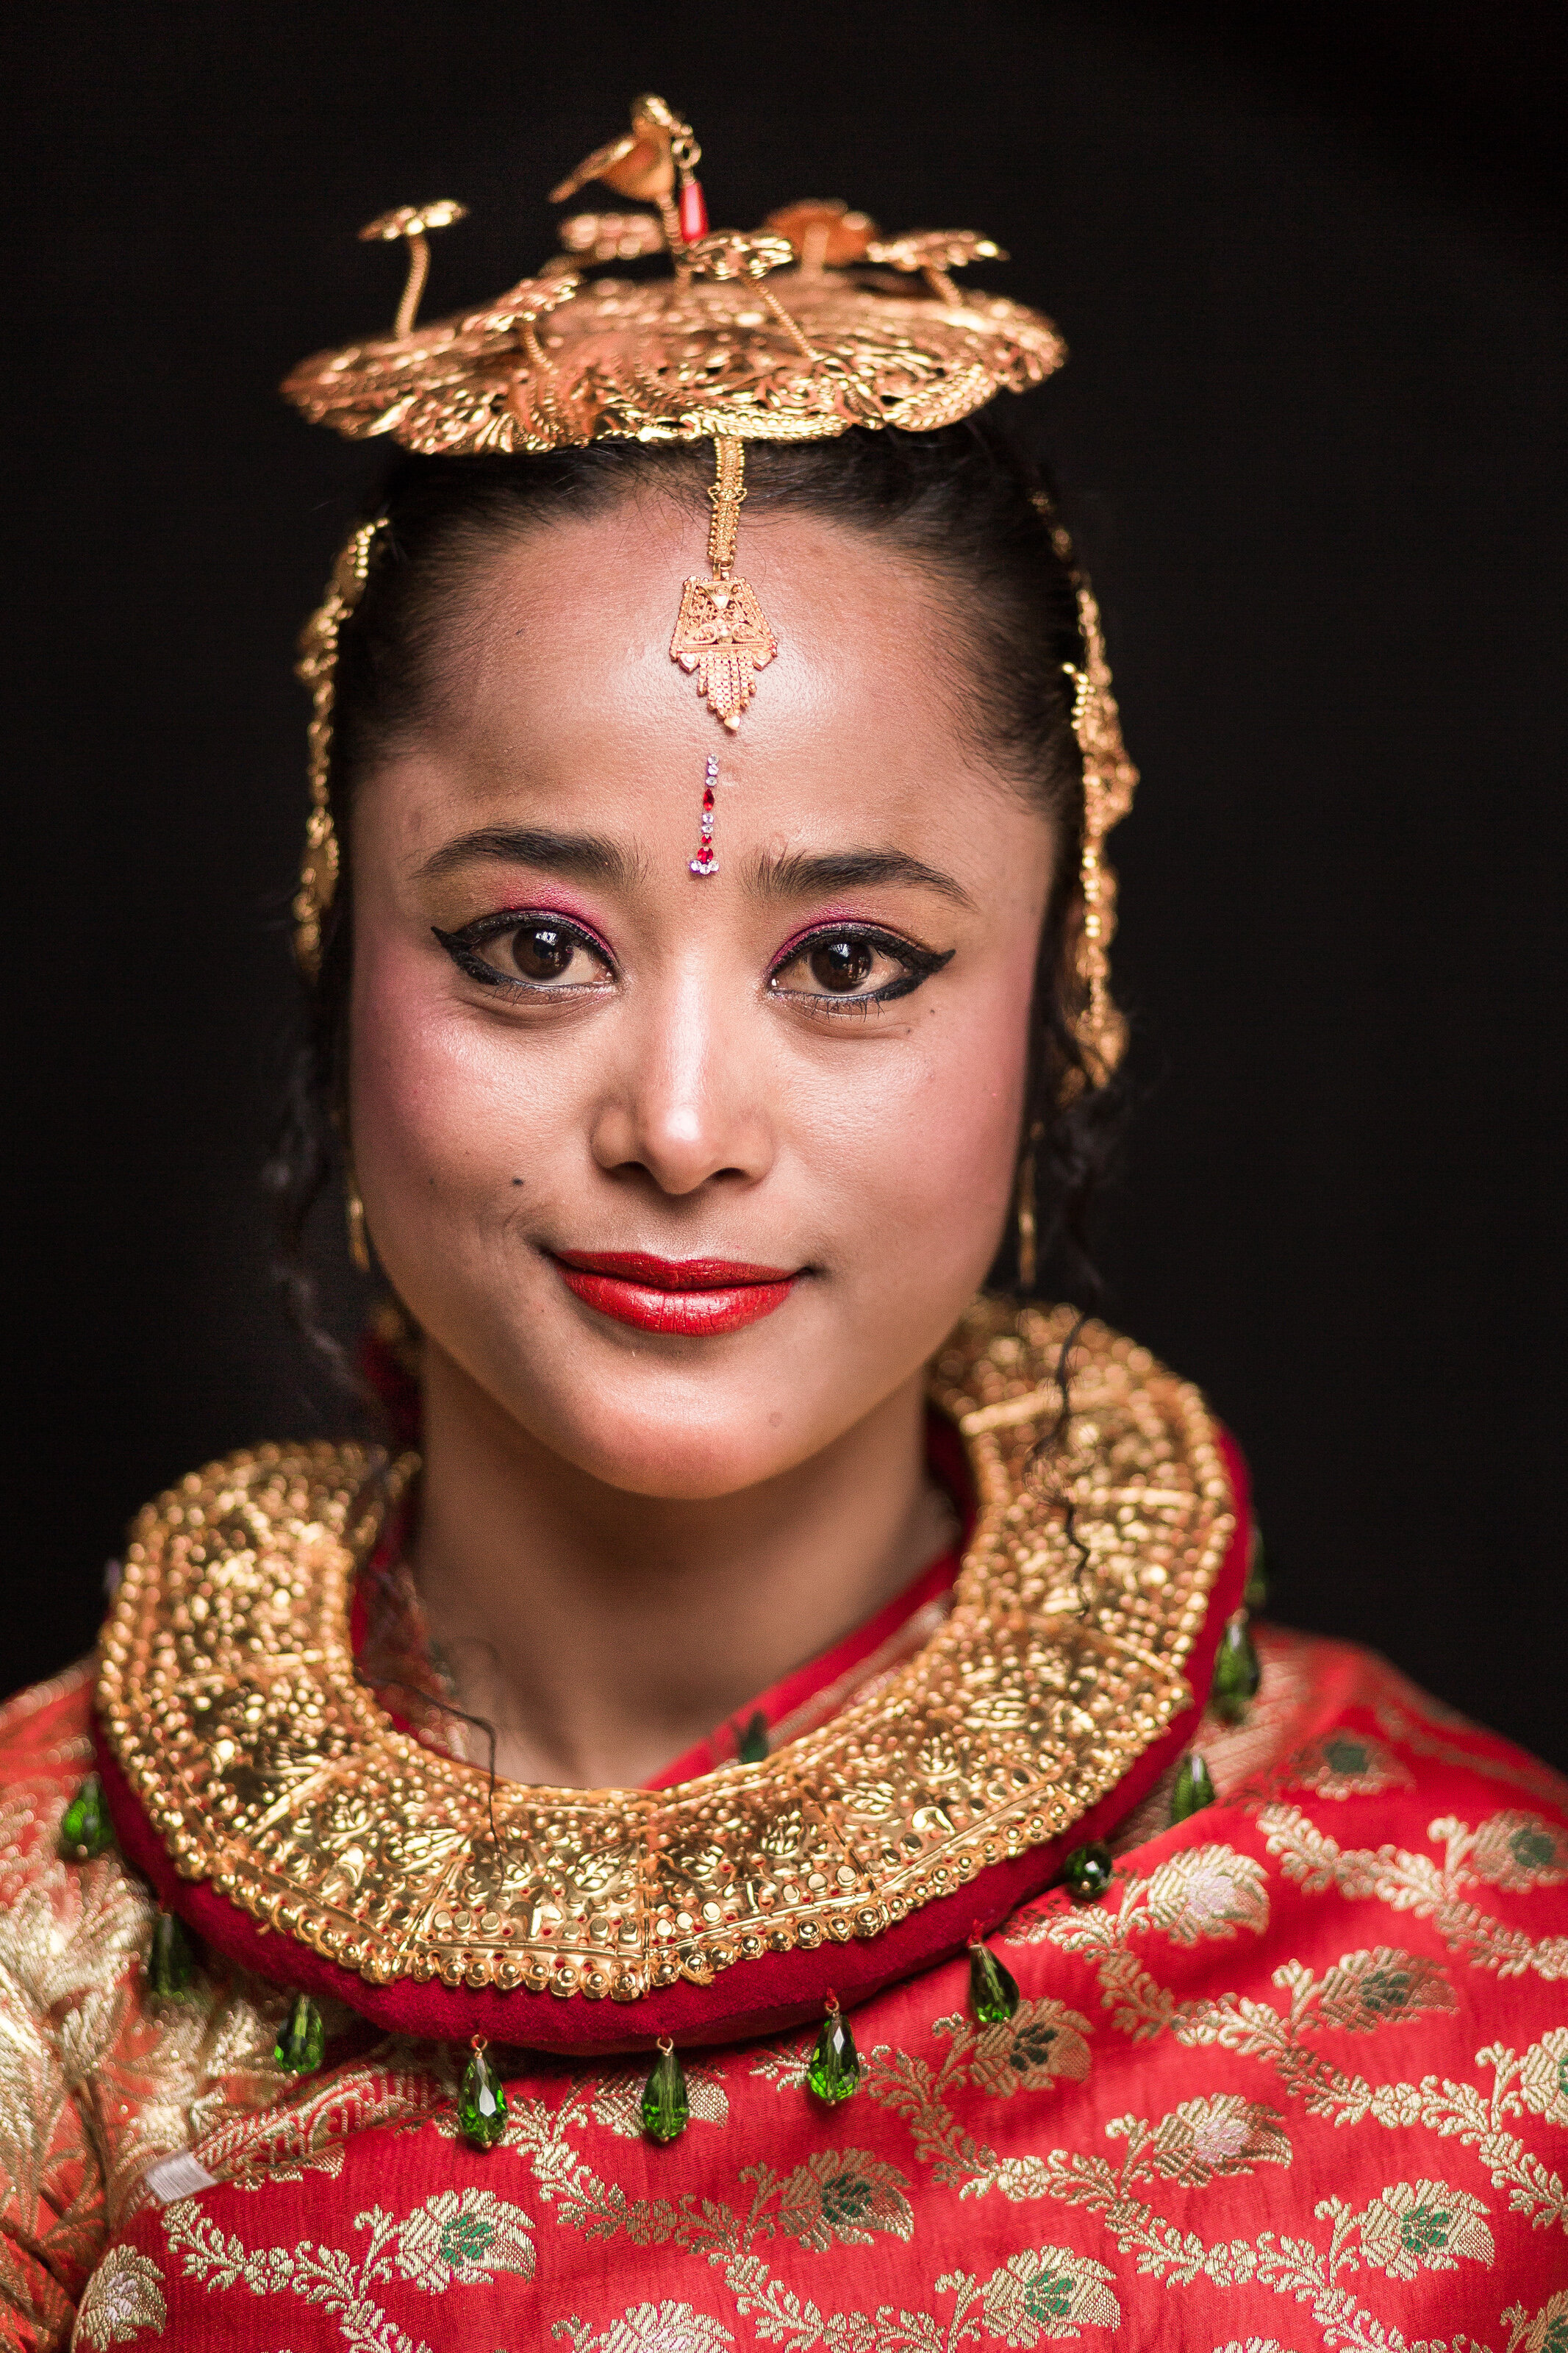  The bride of a wedding within the traditional Newari culture in Kathmandu, Nepal. 